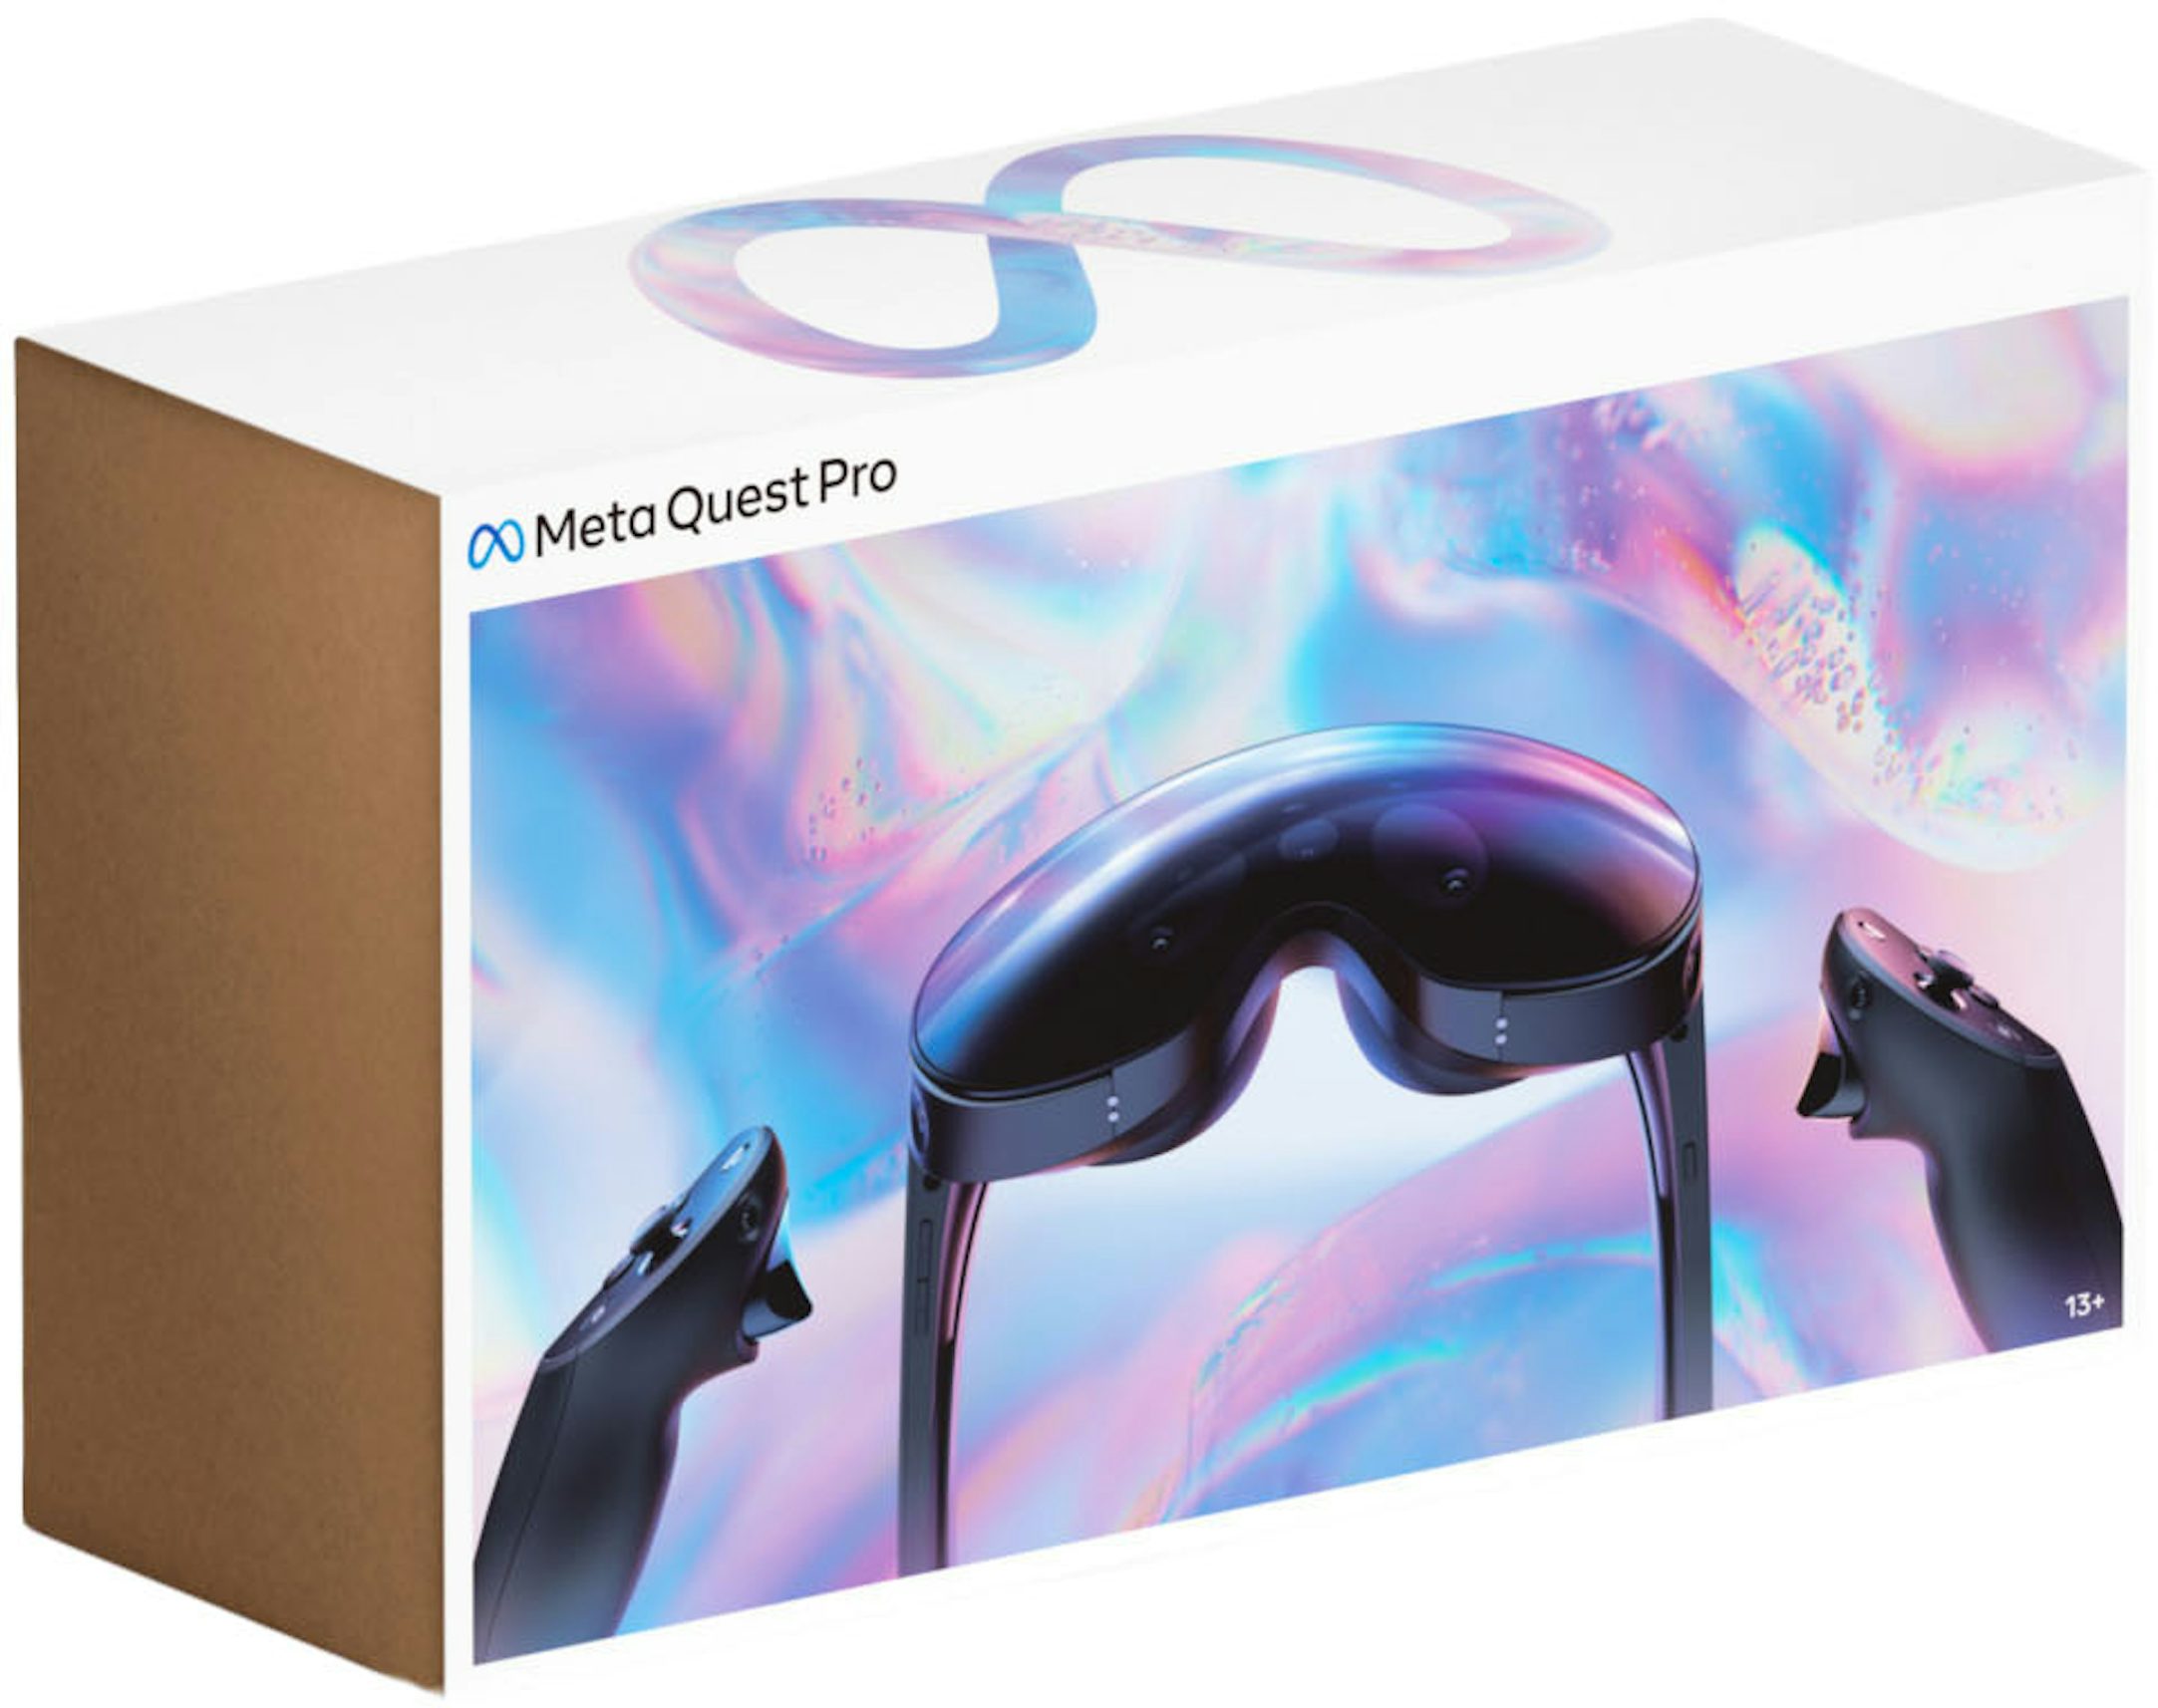 Deal Alert: Score a Meta Quest 2 256GB VR Headset for Only $330.56 at Woot  - IGN, oculus 